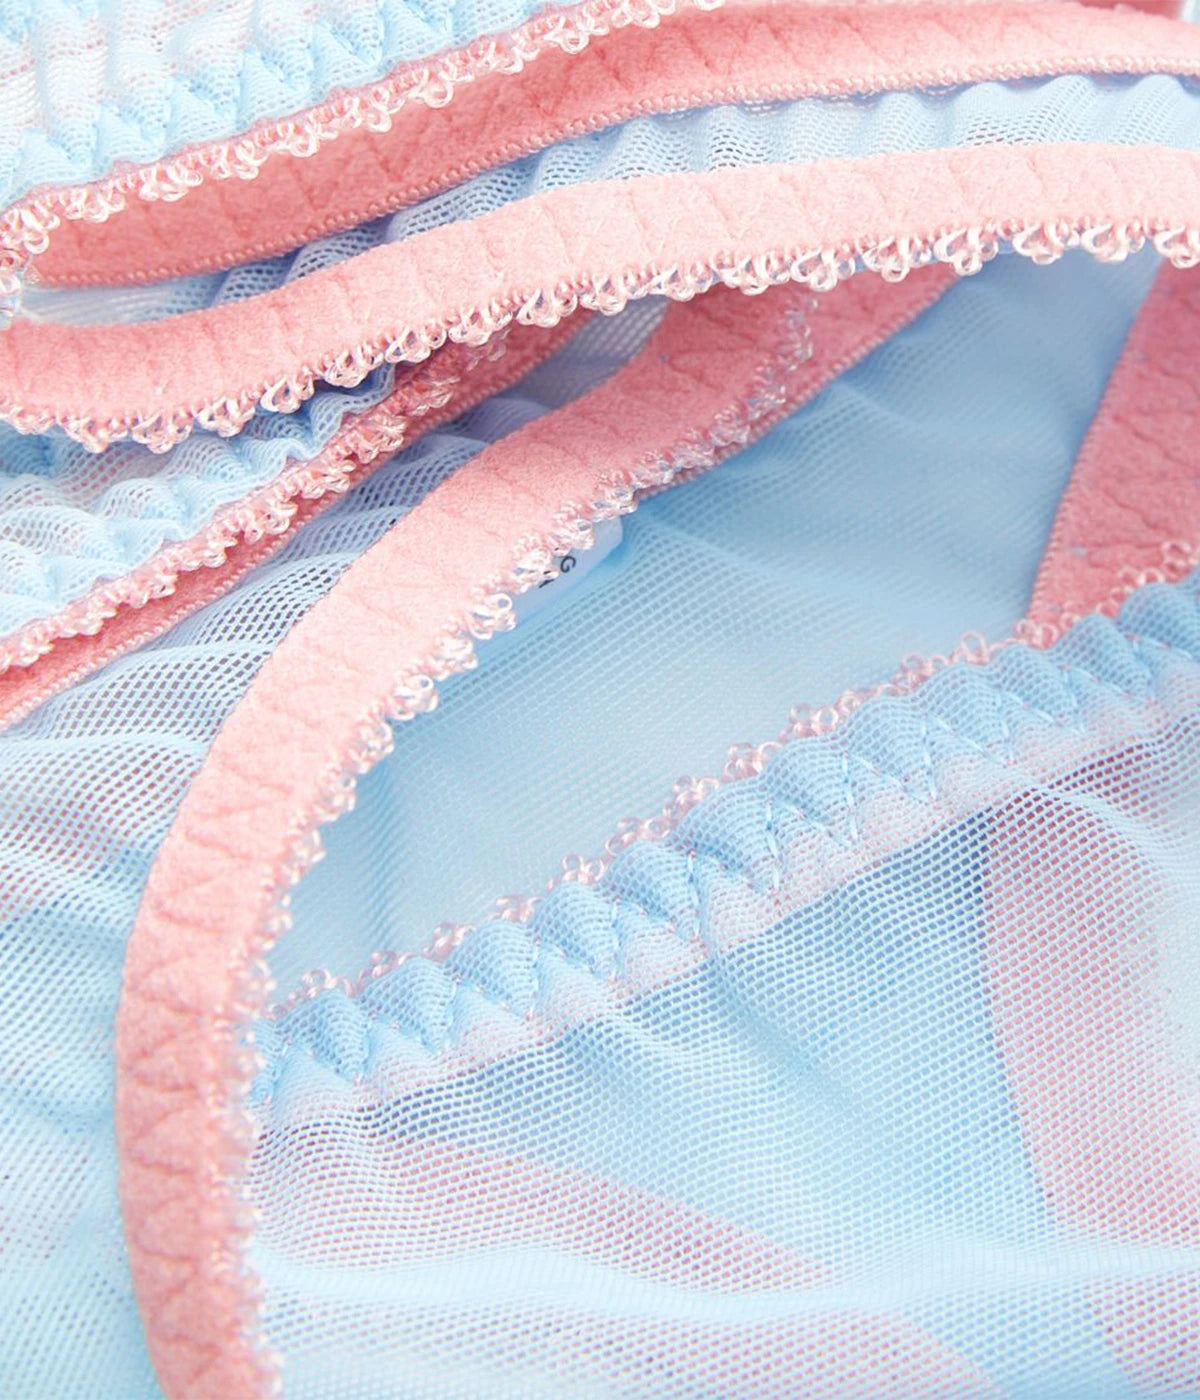 Layla Tulle Thong in Pastel Blue